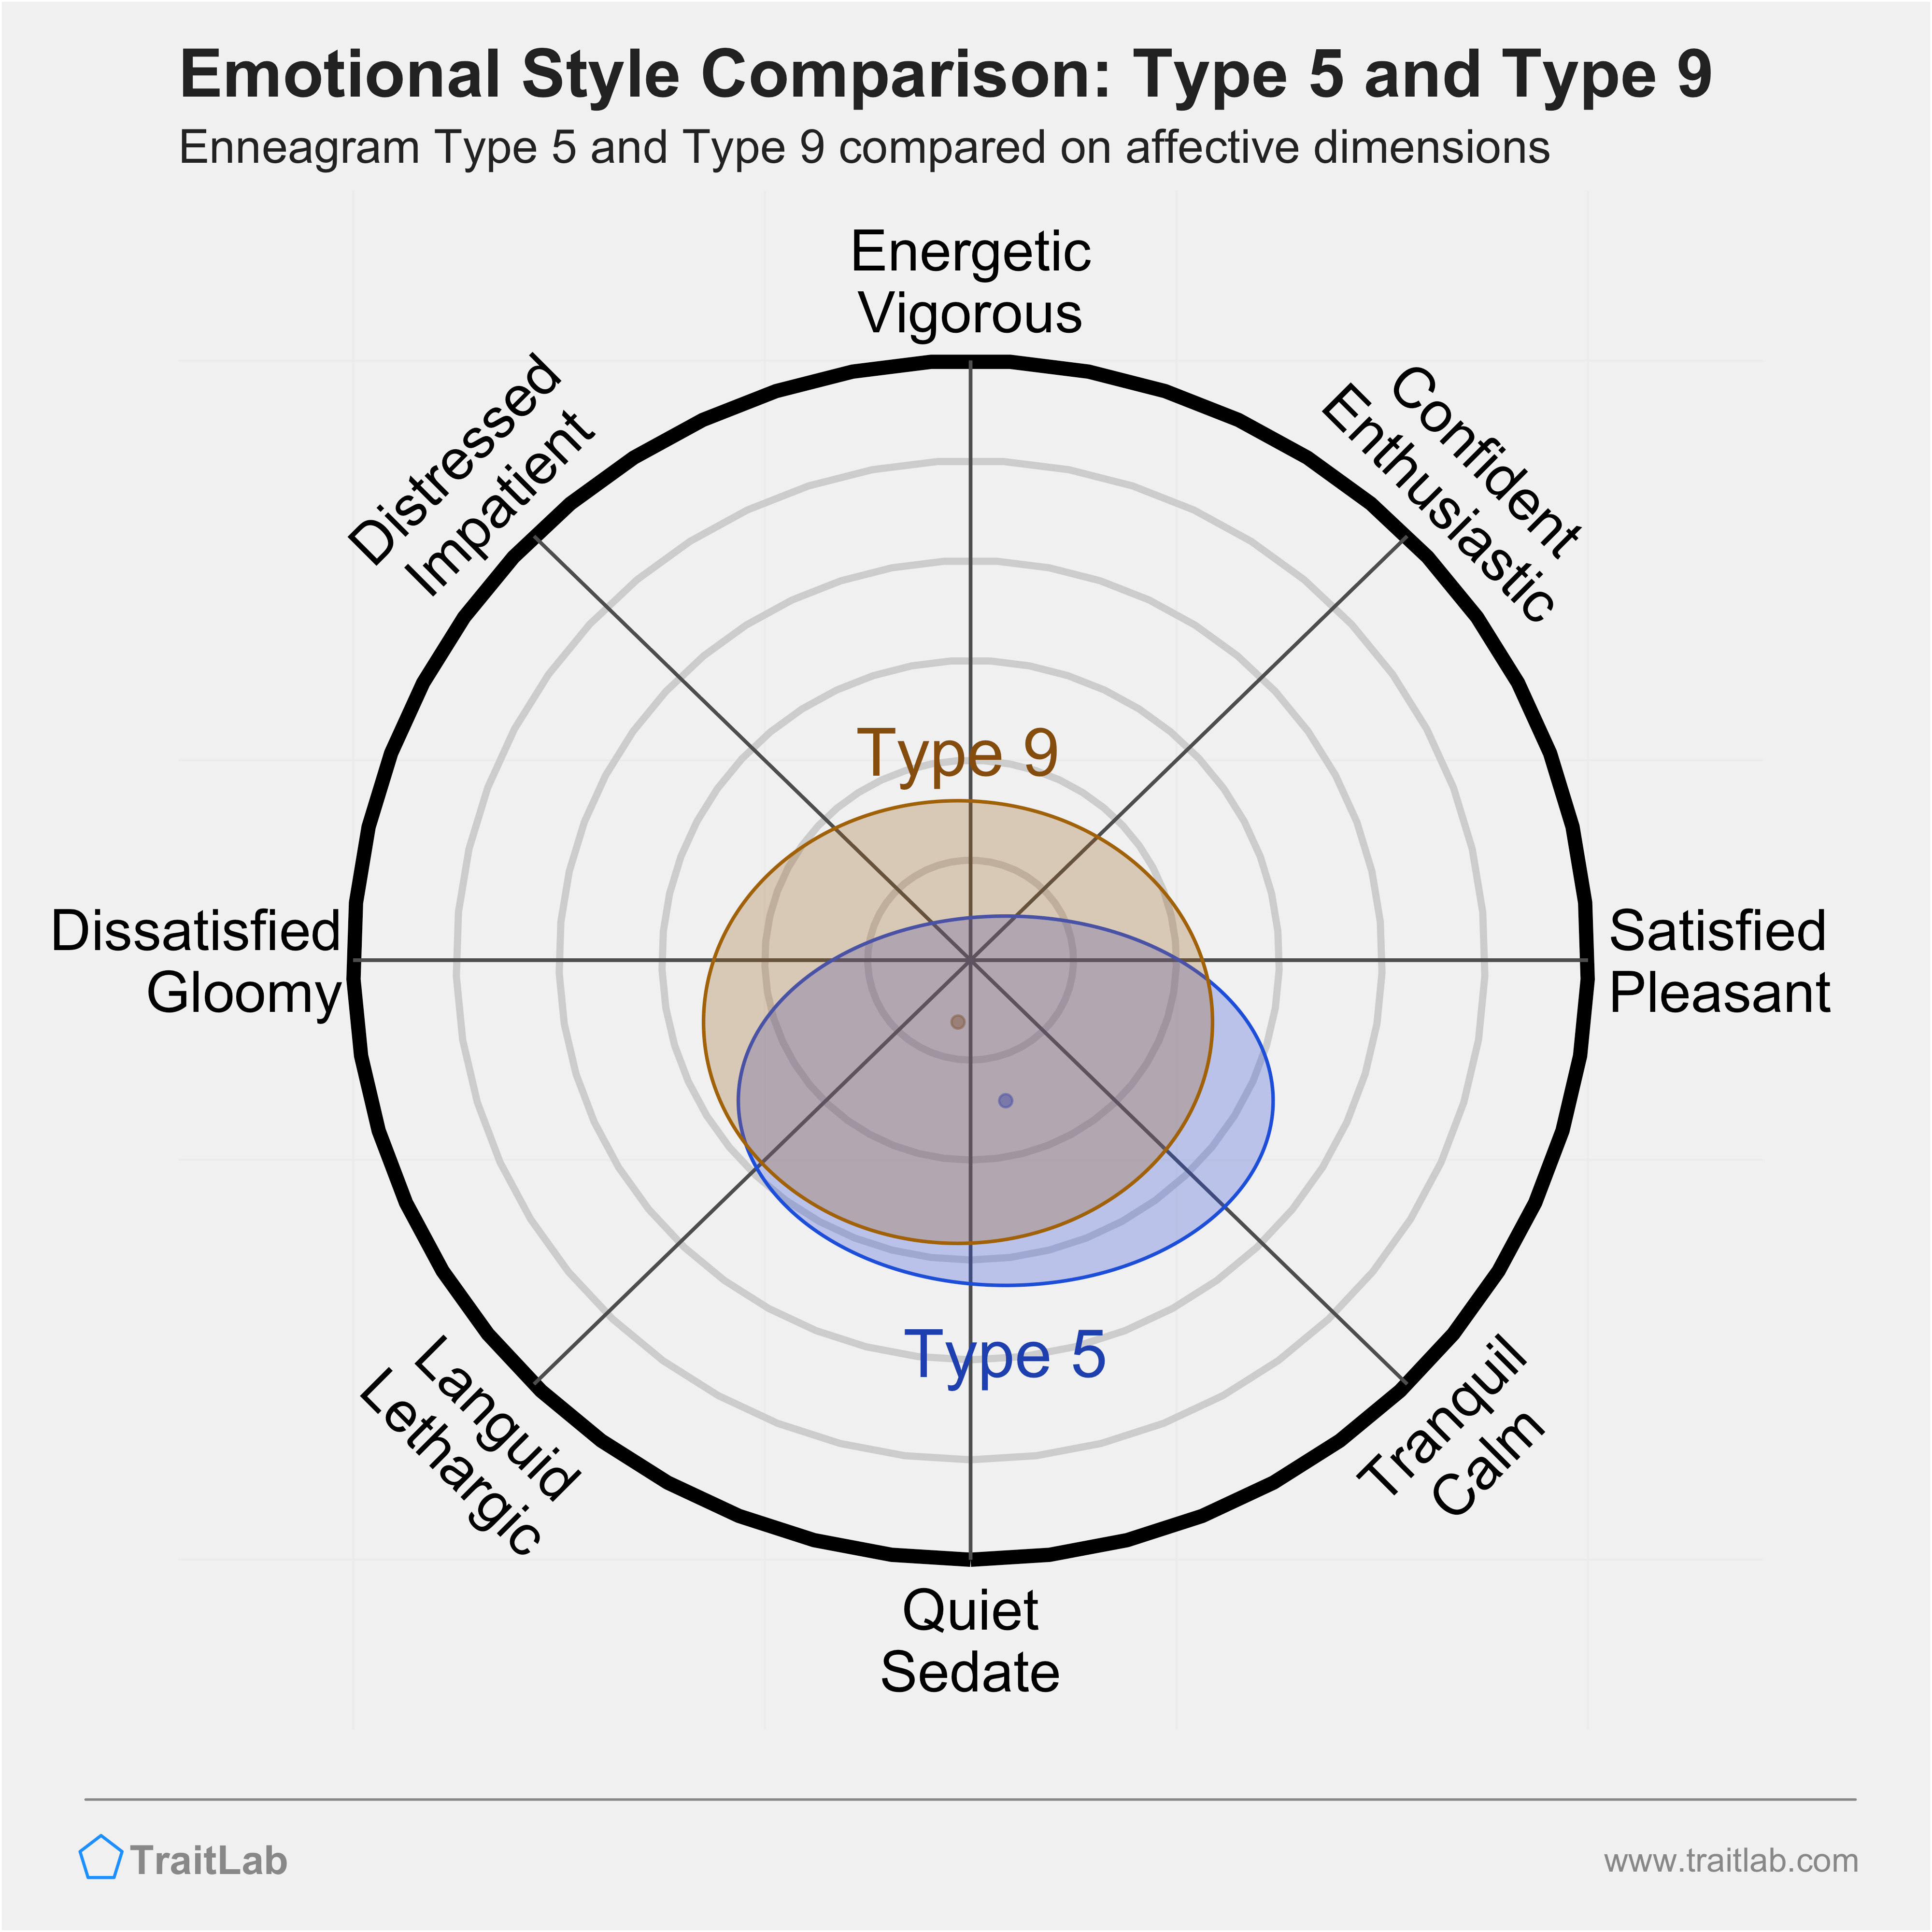 Type 5 and Type 9 comparison across emotional (affective) dimensions